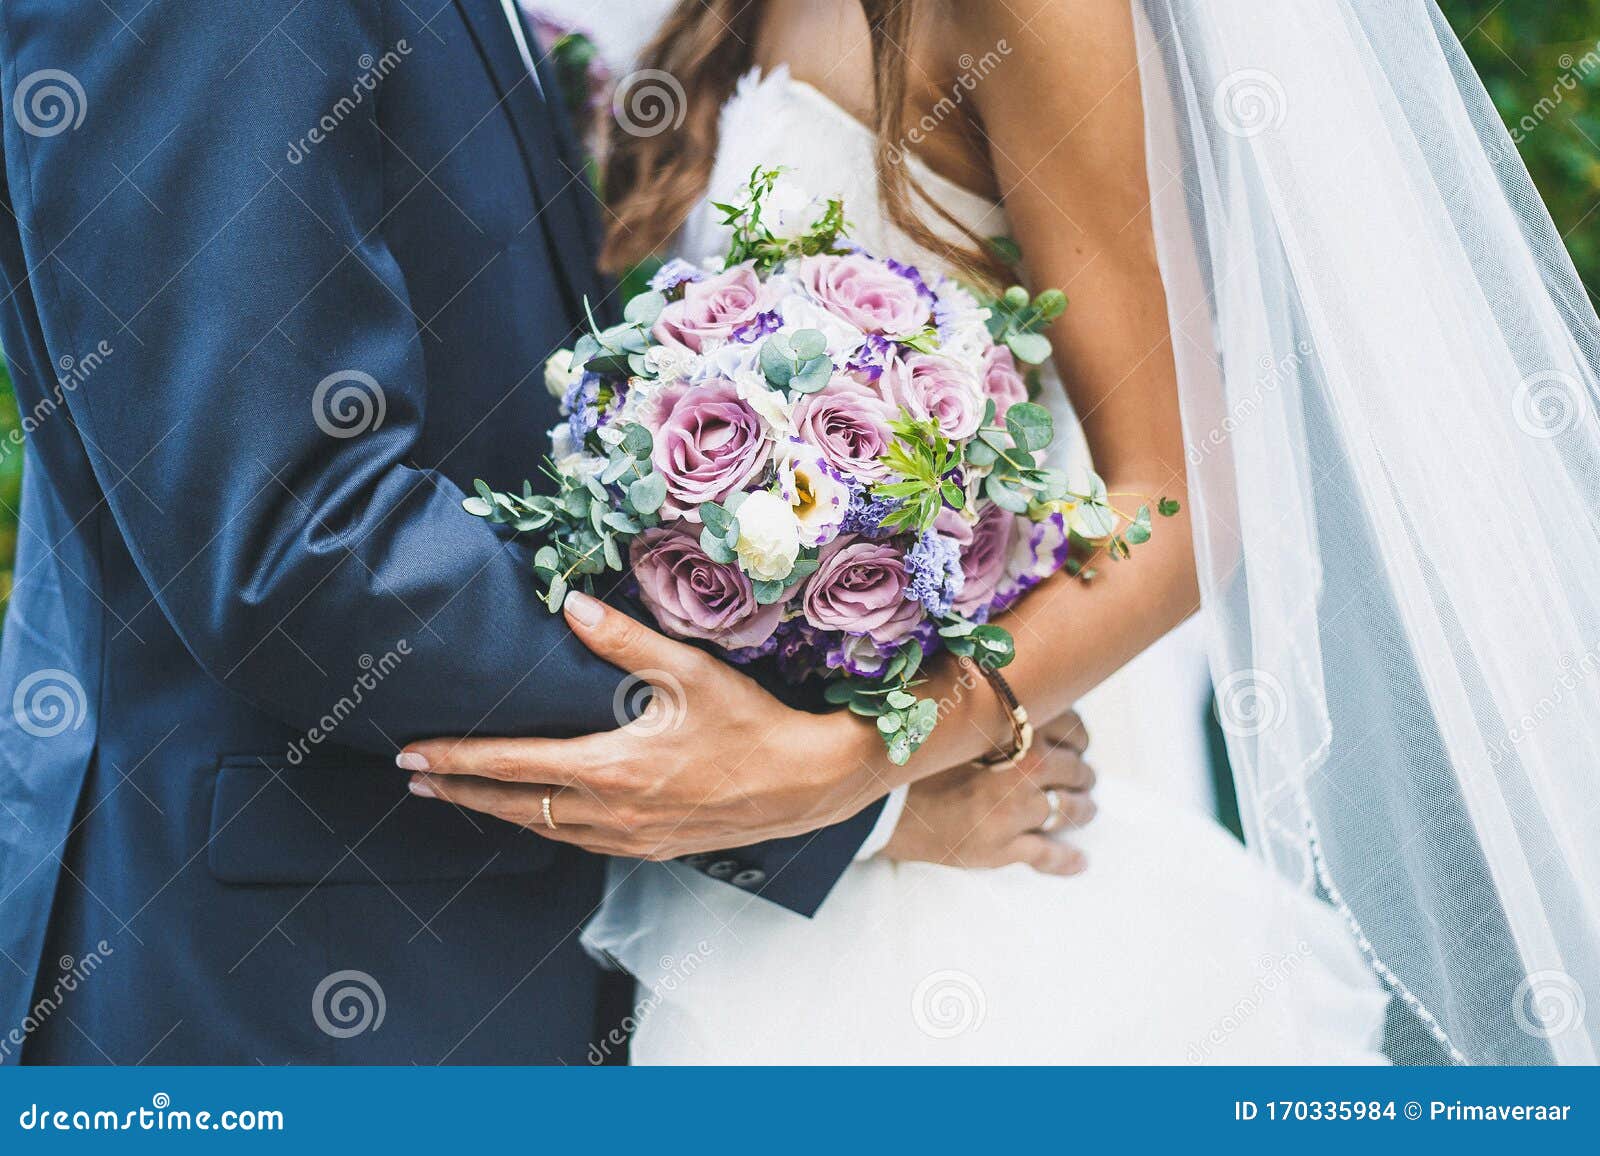 Wedding Day, the Bride and Groom are Holding a Wedding Bouquet, Faces ...